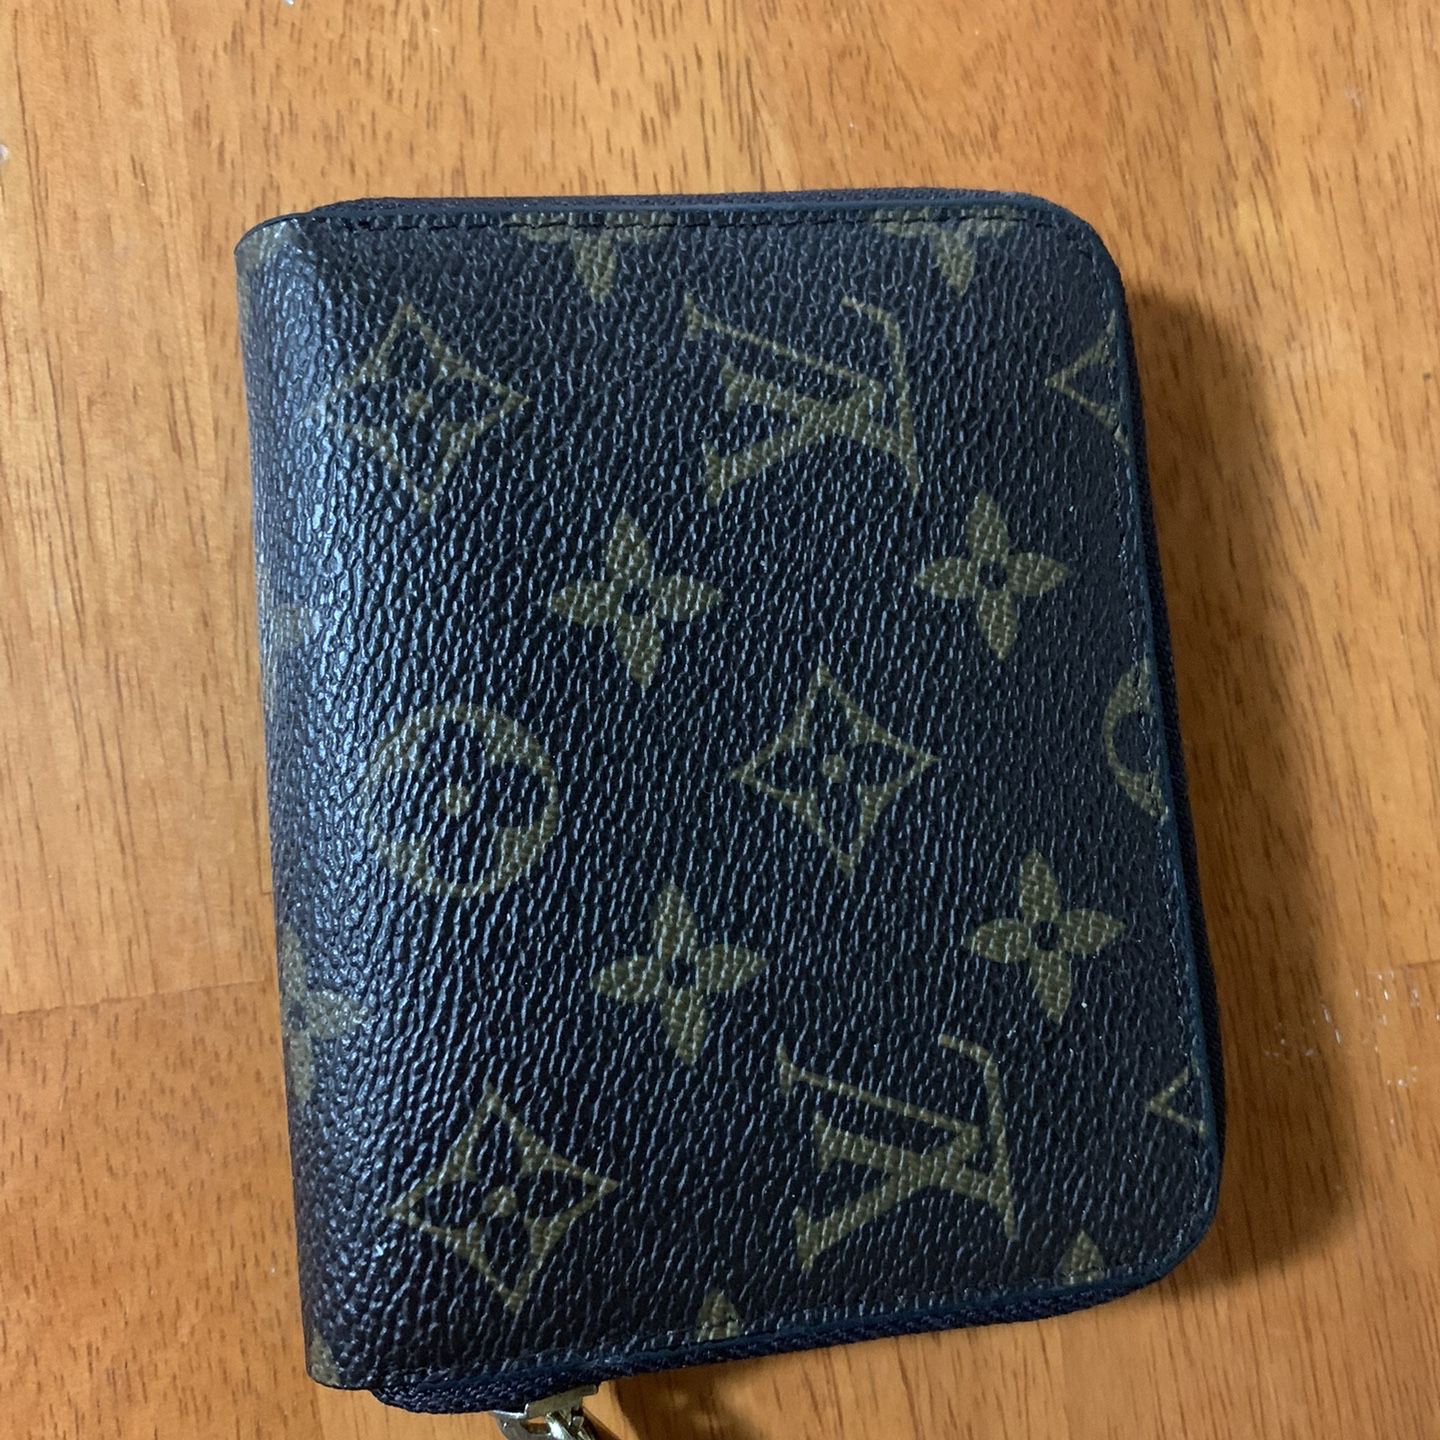 LV Wallet for Sale for Sale in Bryan, TX - OfferUp